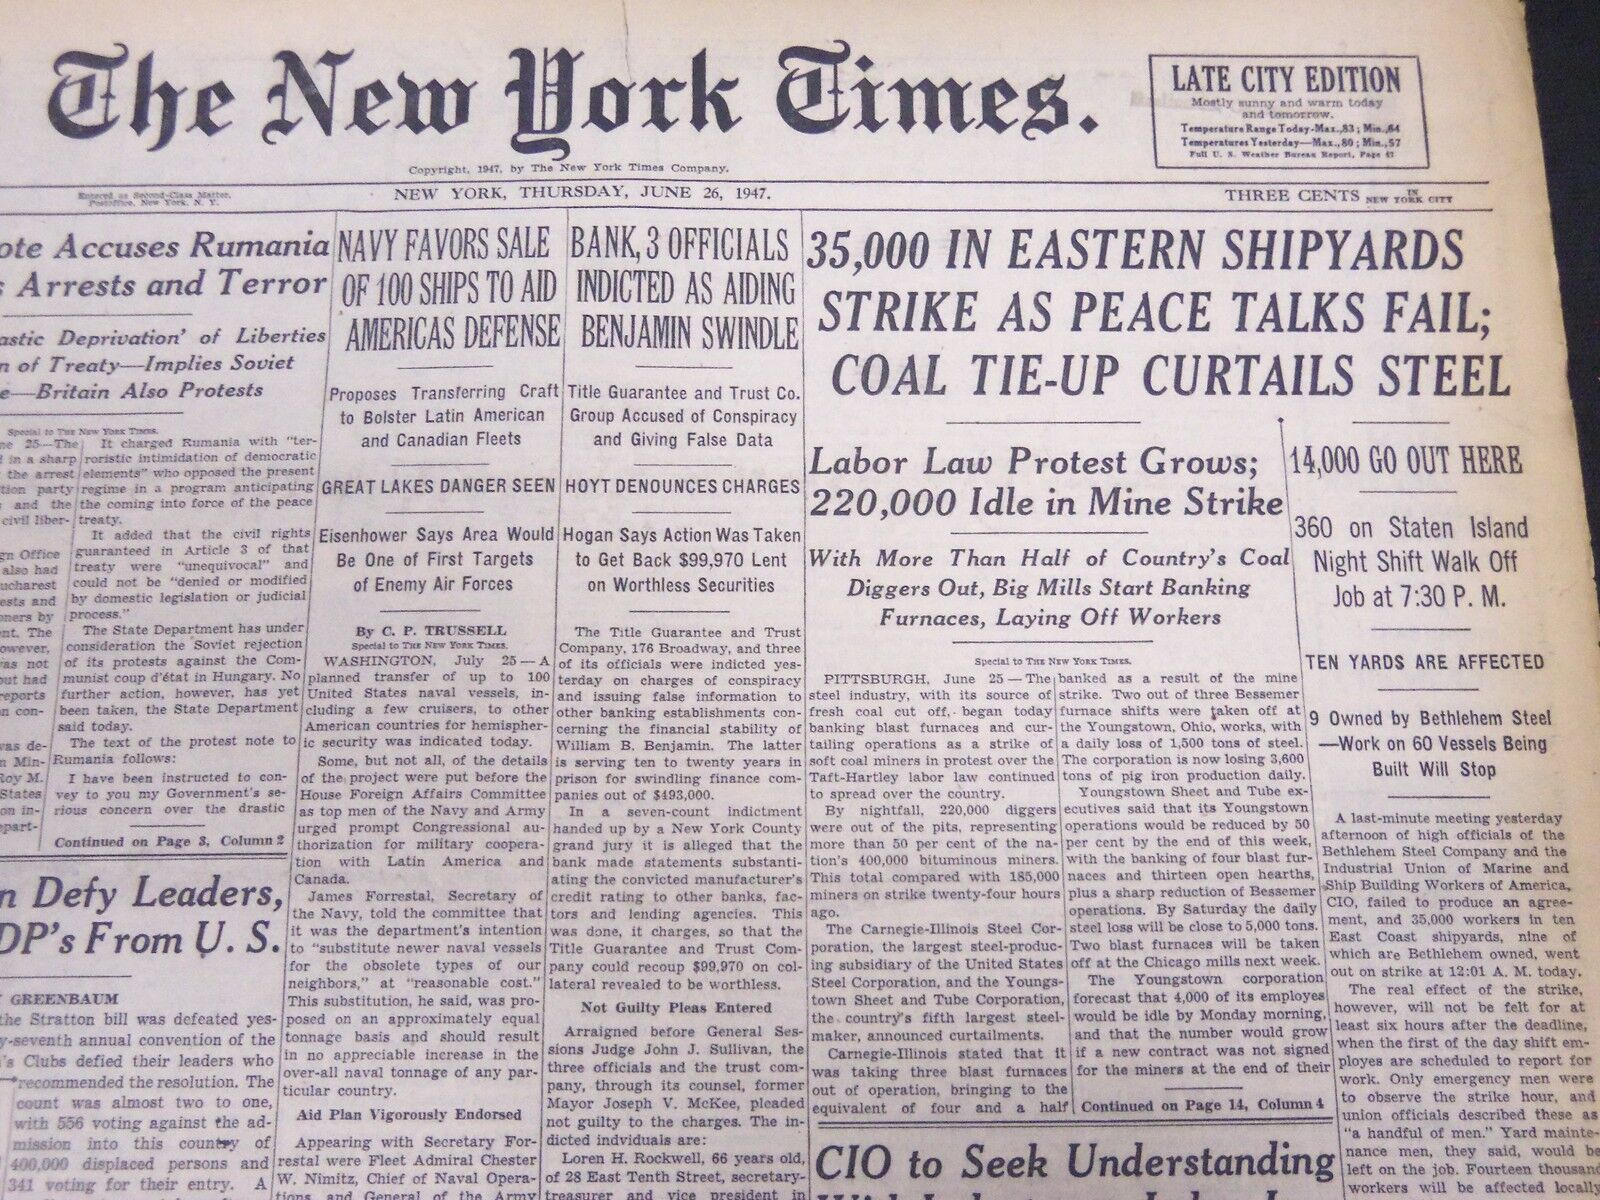 1947 JUNE 26 NEW YORK TIMES - COAL TIE-UP CURTAILS STEEL - NT 5160